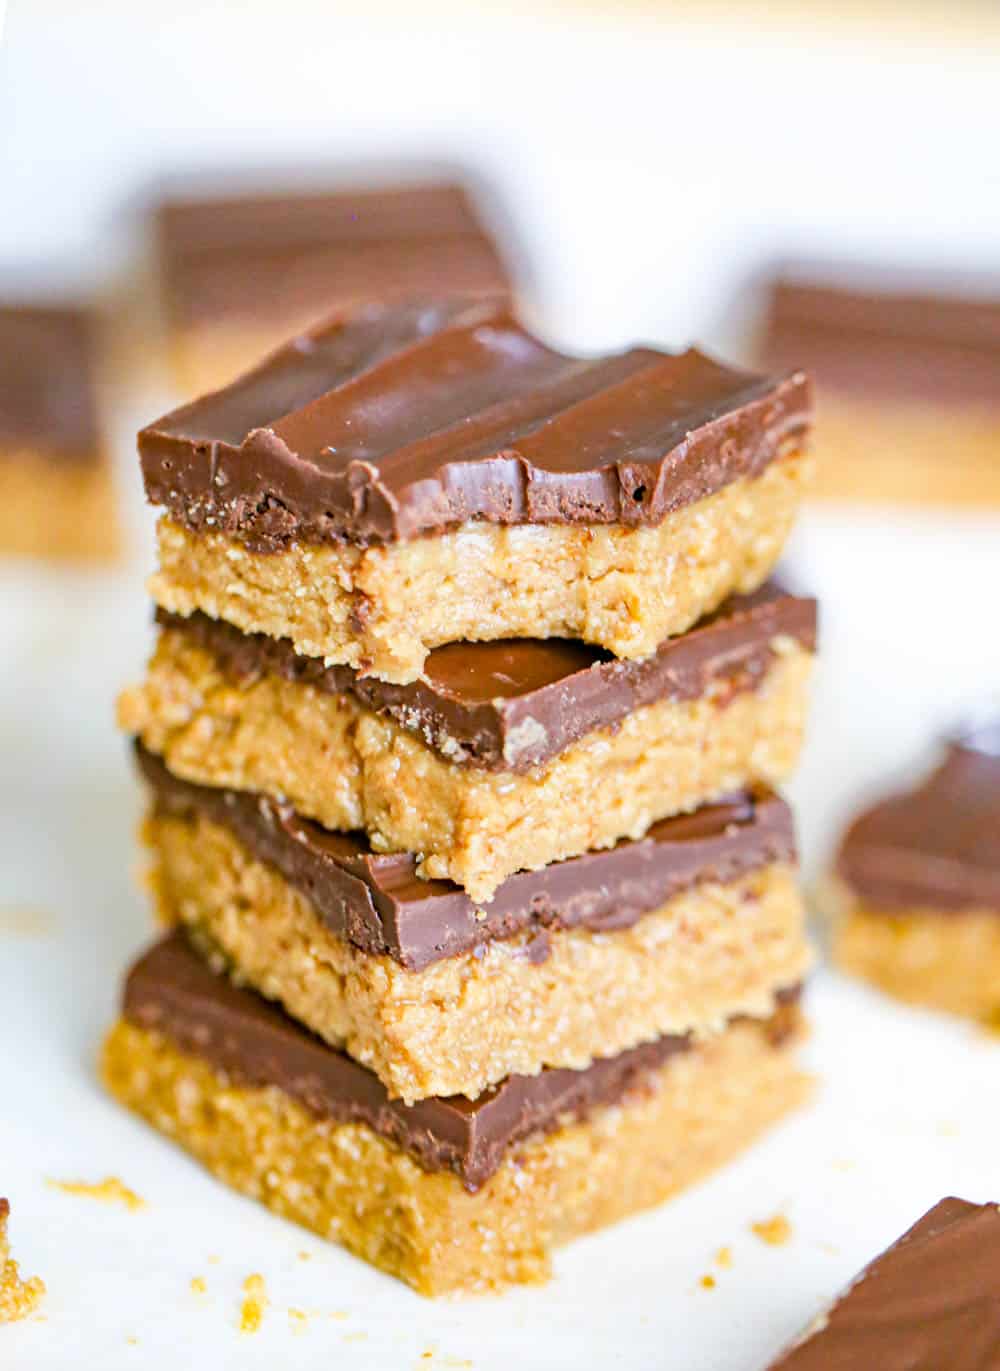 5 Ingredient Peanut Butter Bars Do-it-yourself no-bake bars